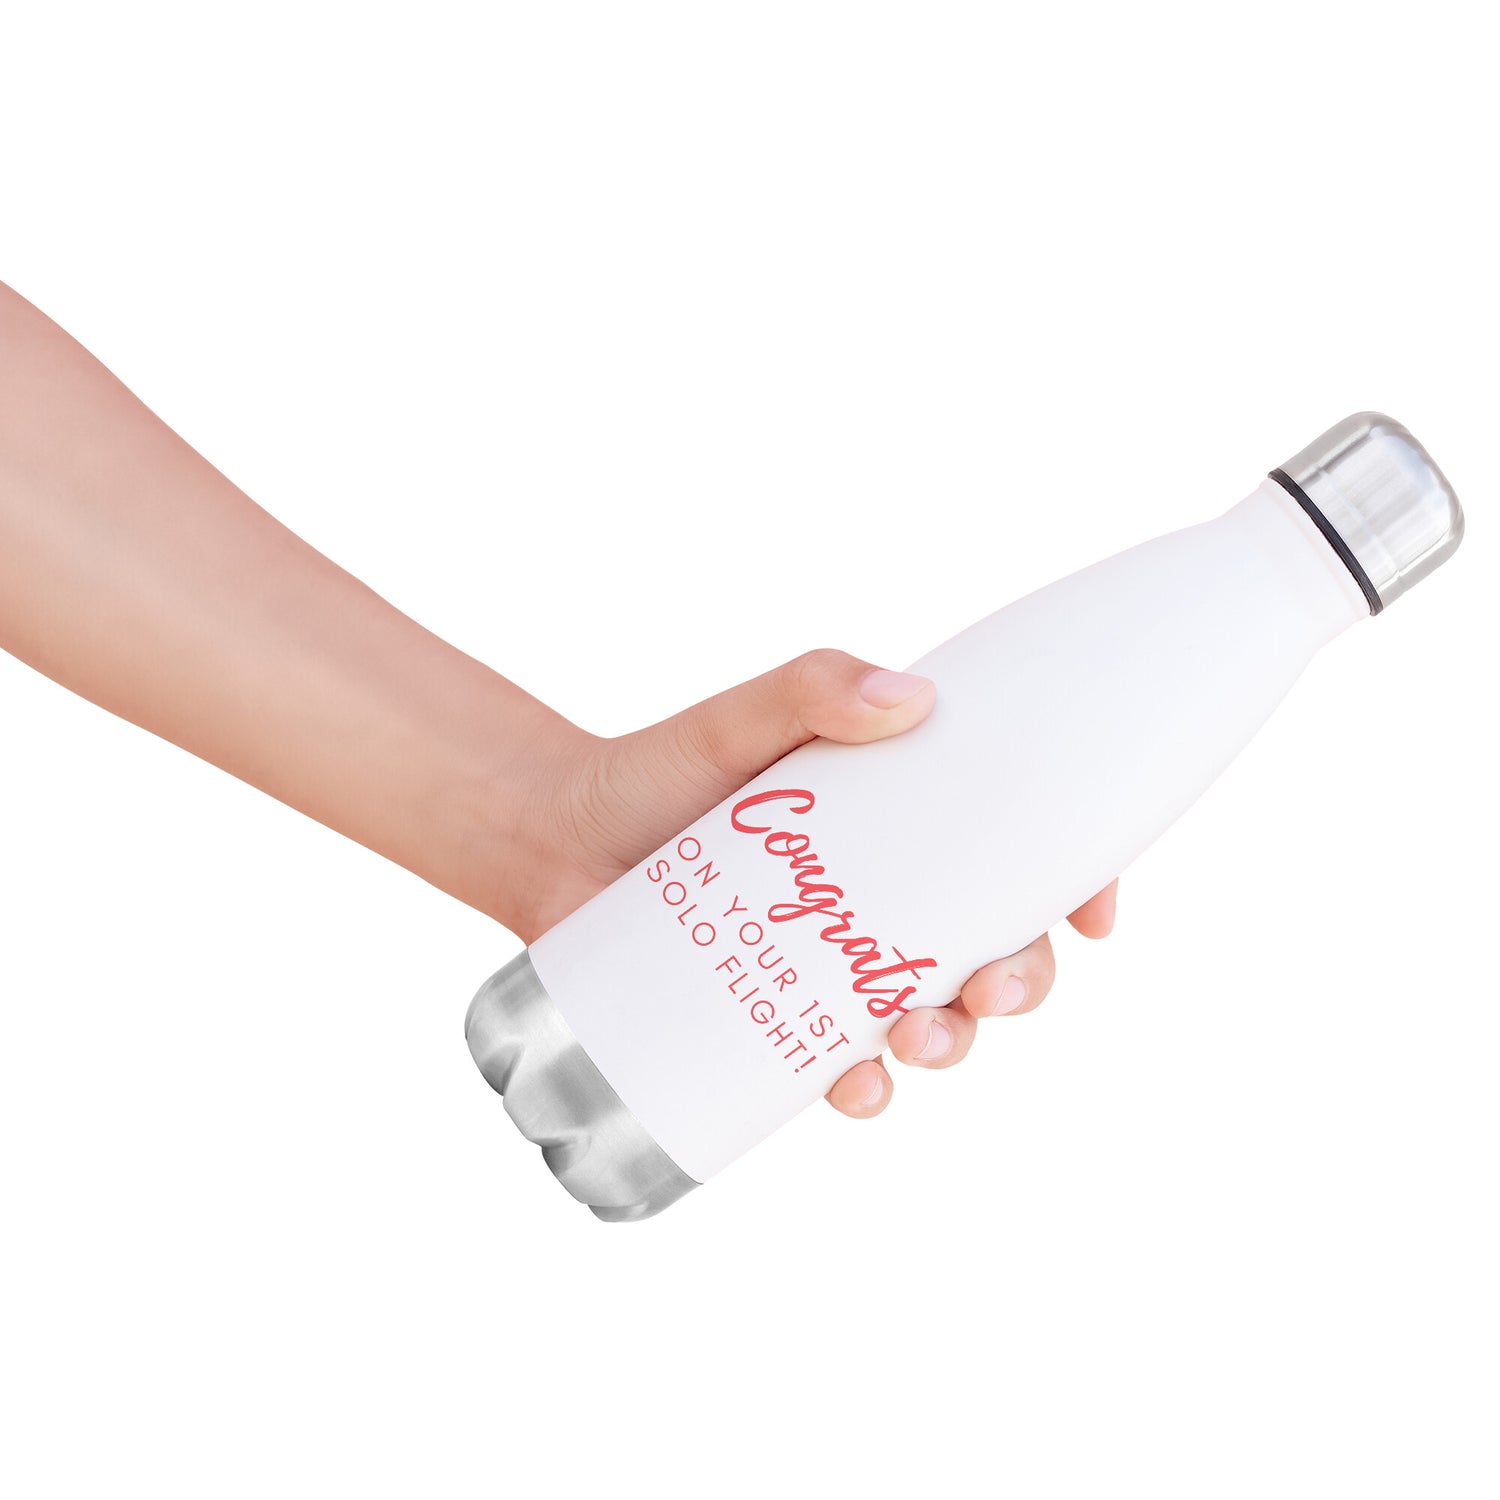 Congrats on your first solo flight! - stainless steel water bottle with red text